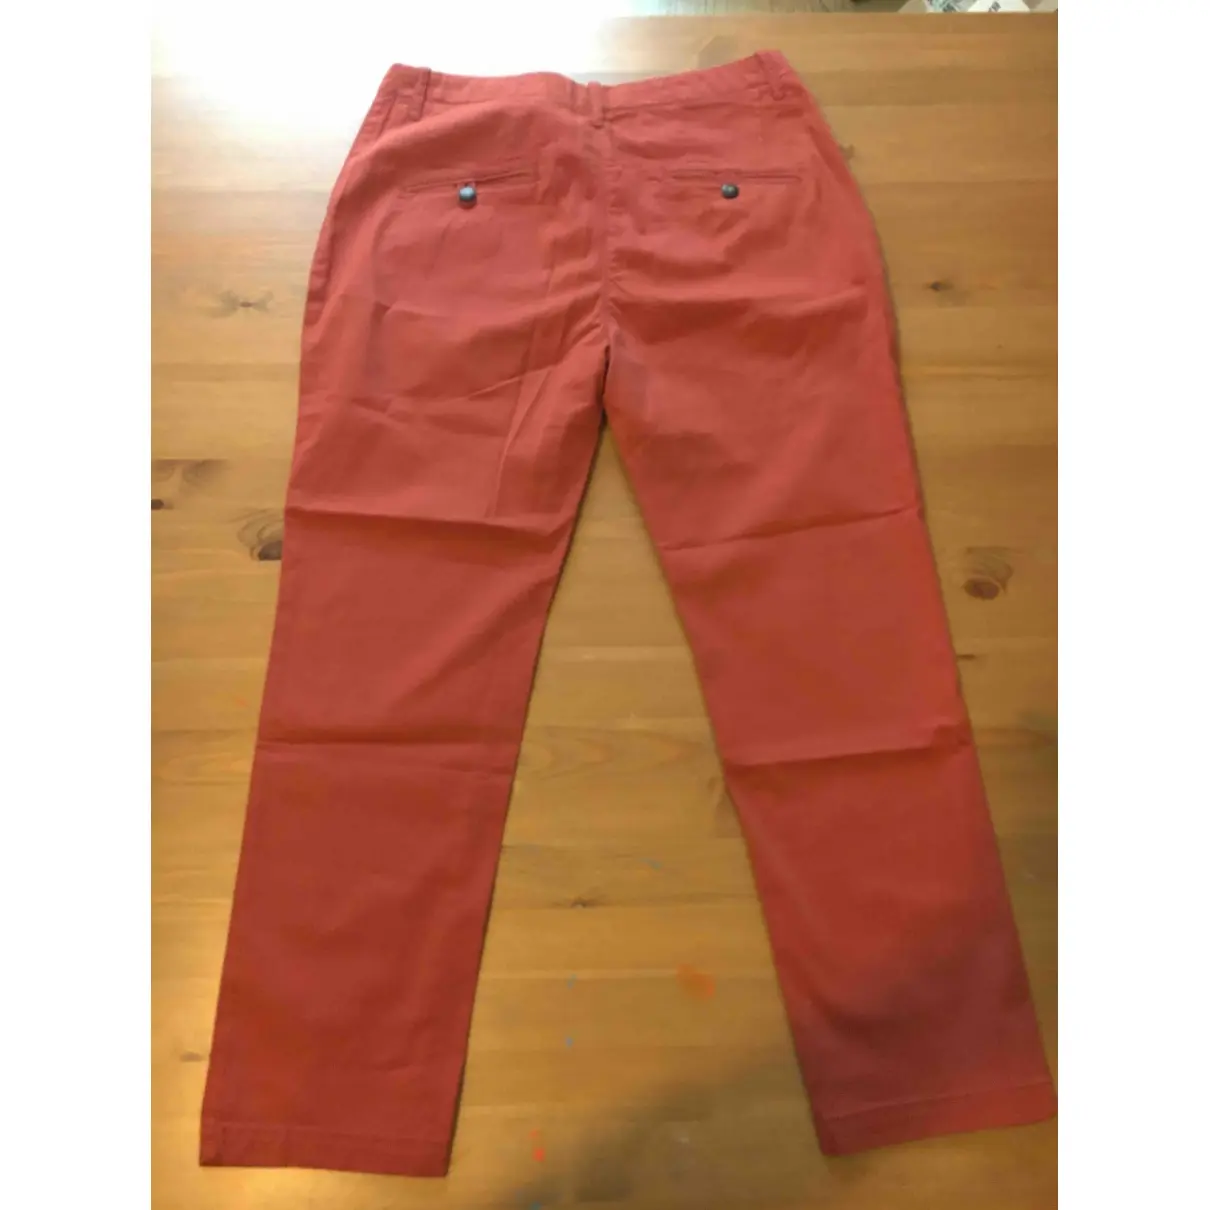 Jucca Chino pants for sale